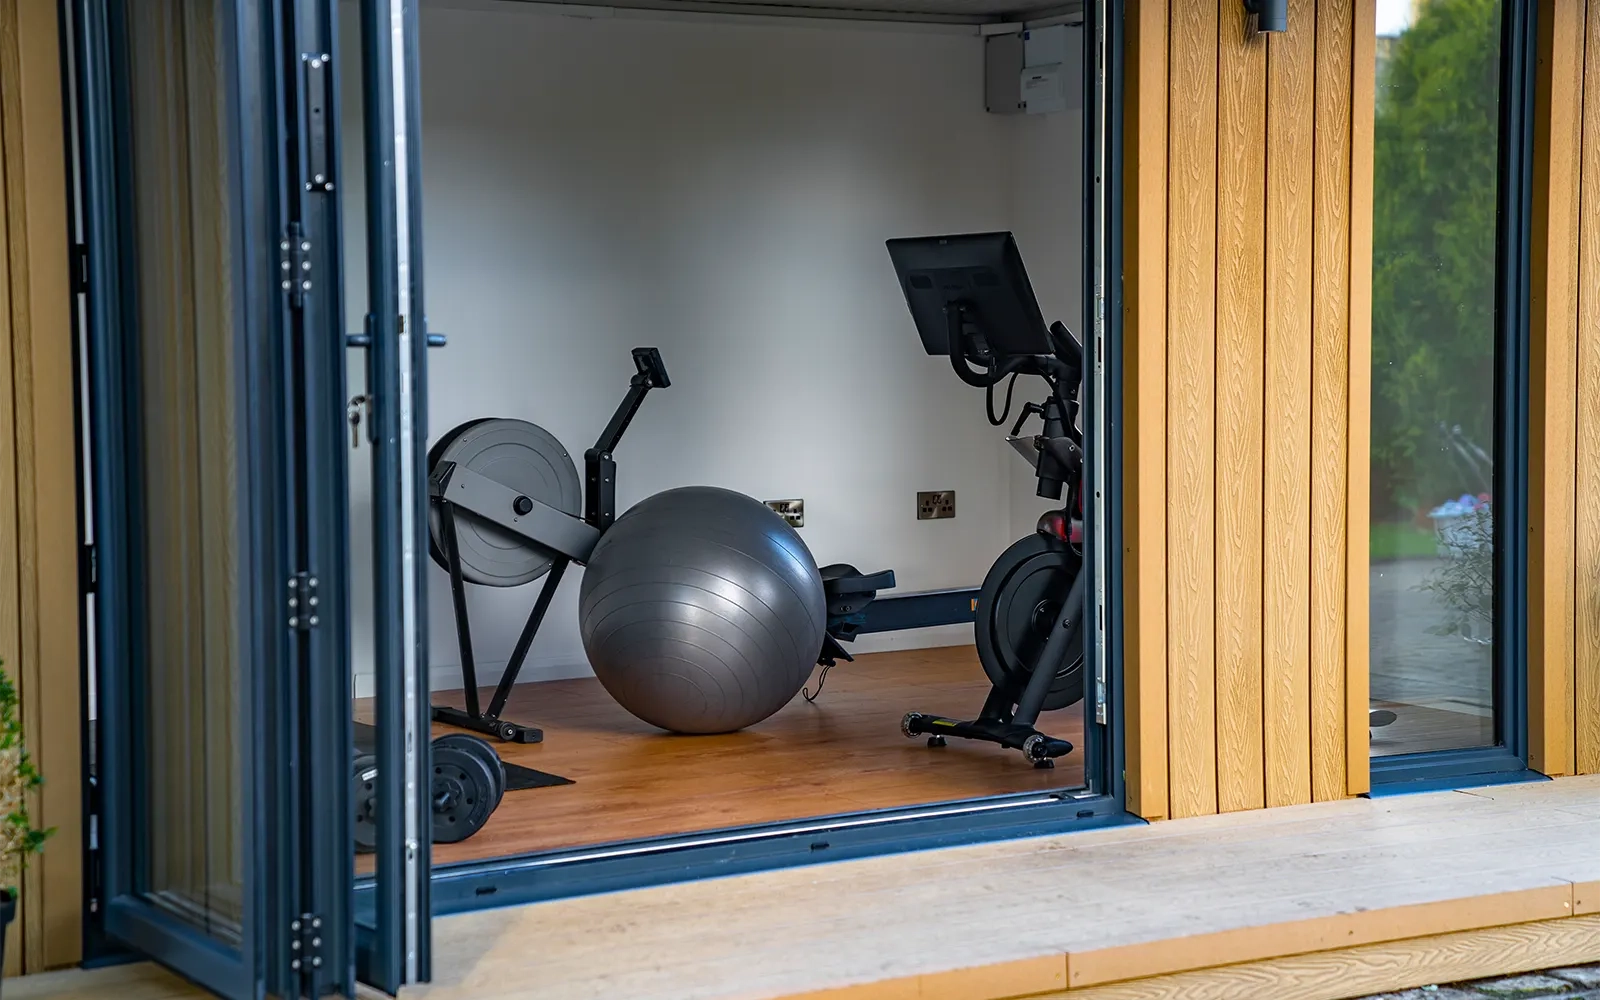 A photo looking into a garden room which has been set up as a home gym